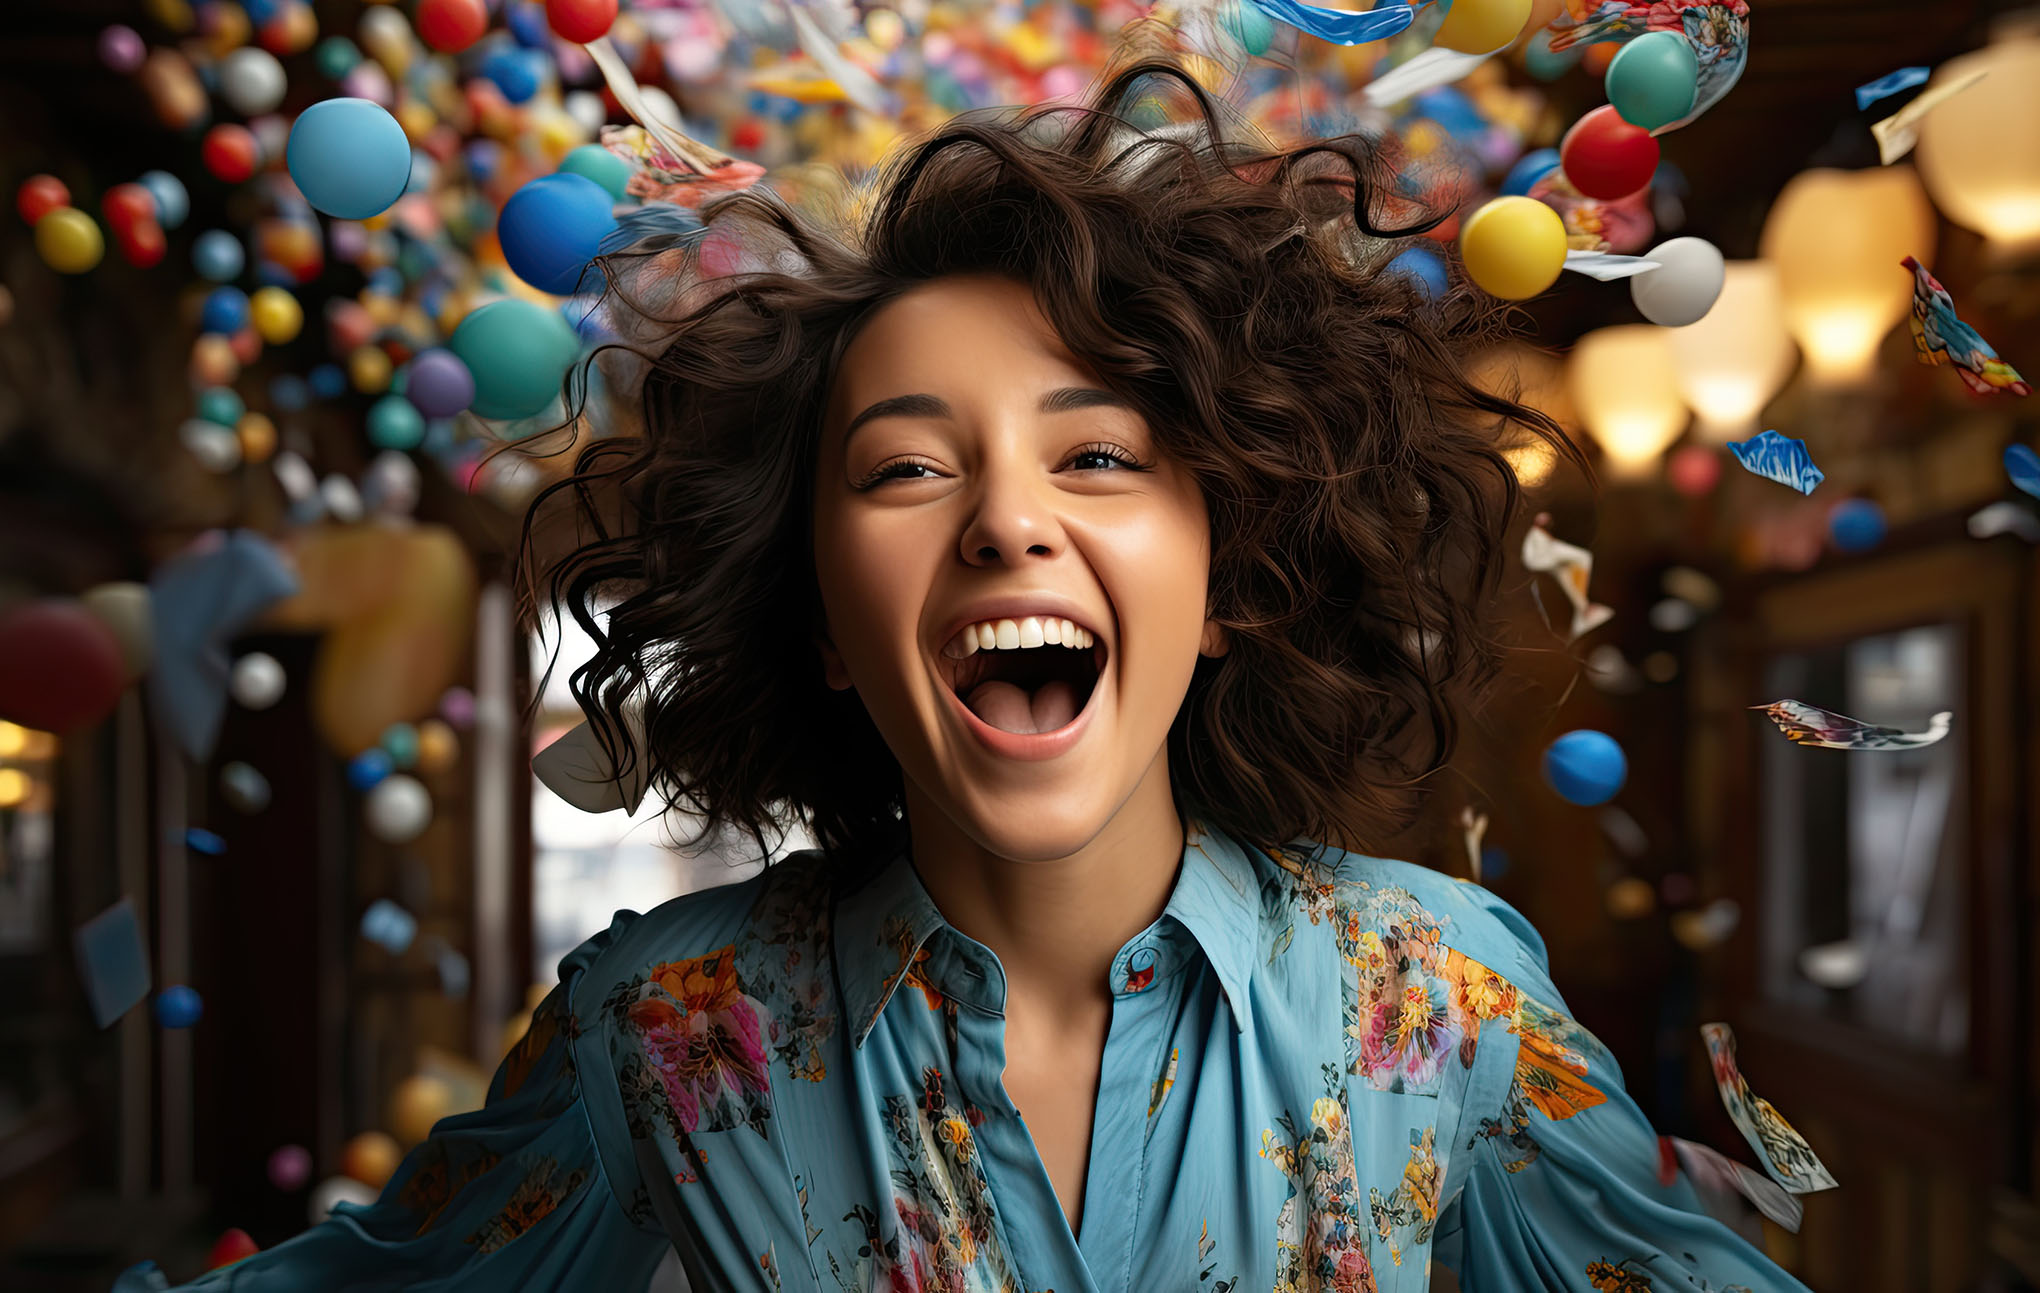 A joyful woman with curly hair laughing in a vibrant setting, surrounded by a flurry of colorful floating balloons. she wears a floral blue shirt and exudes a sense of festivity and happiness.